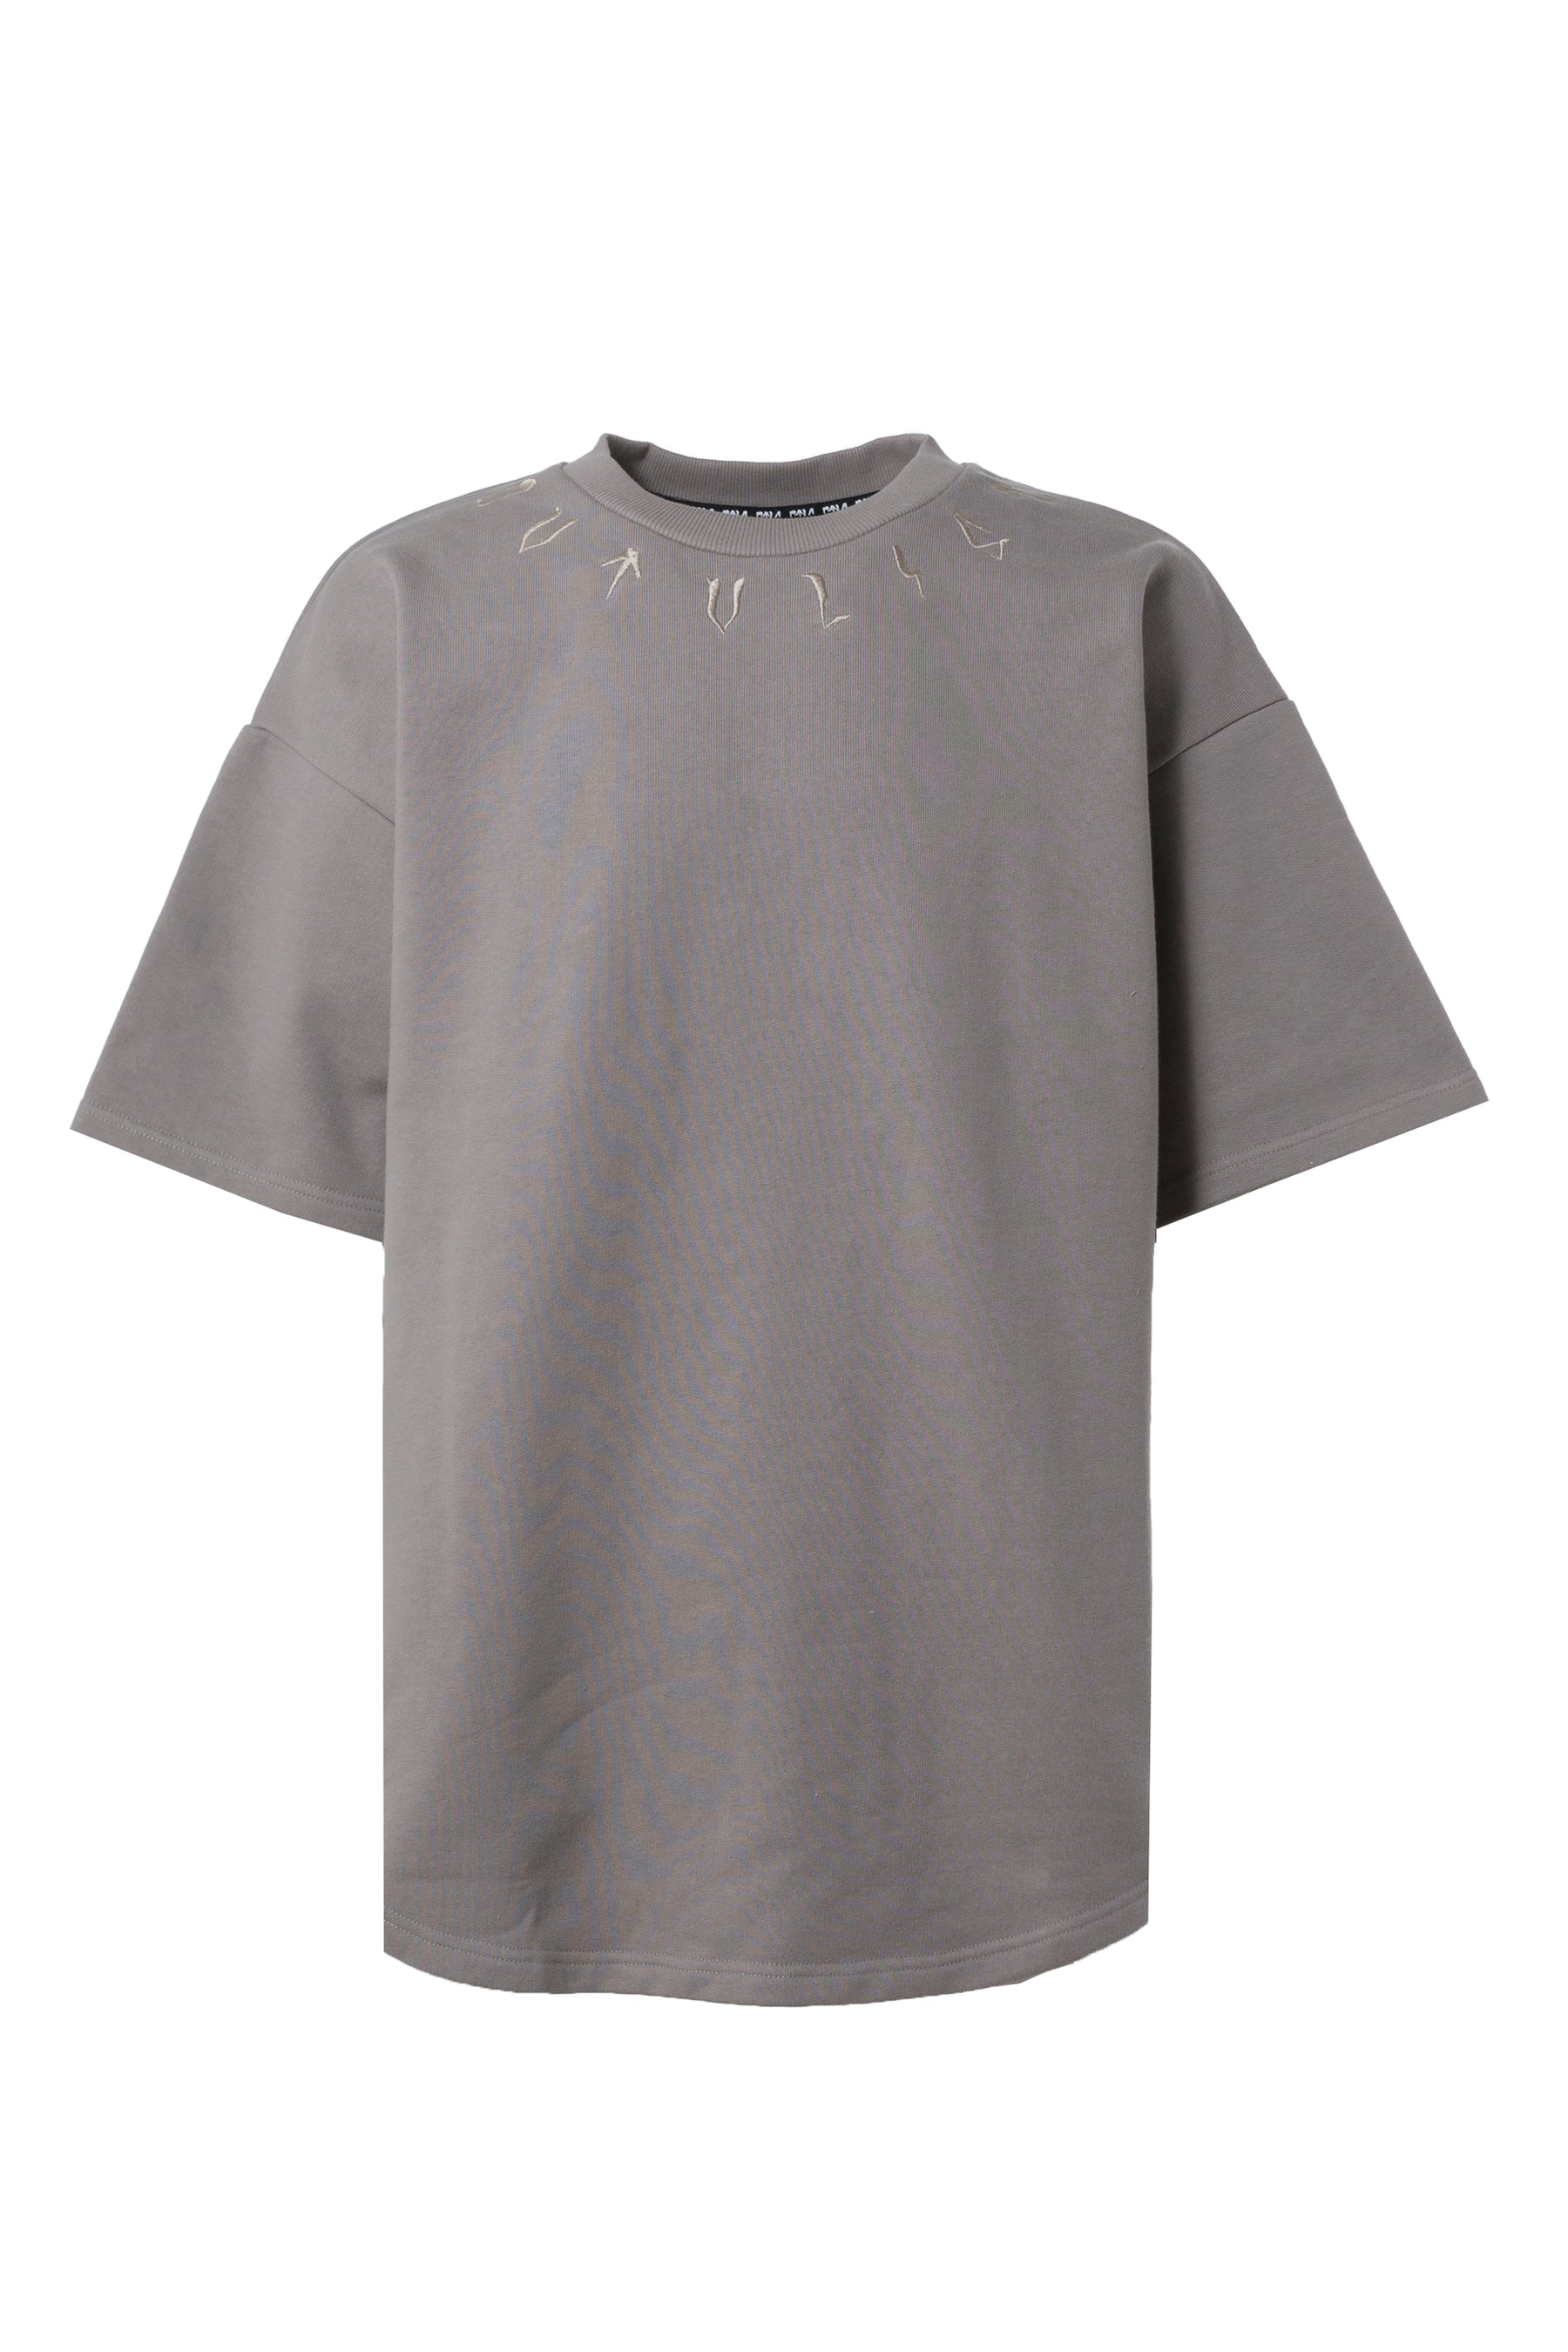 CVTVLIST SS23 CTLS USUAL S/S TEE SPECIAL / GRY -NUBIAN